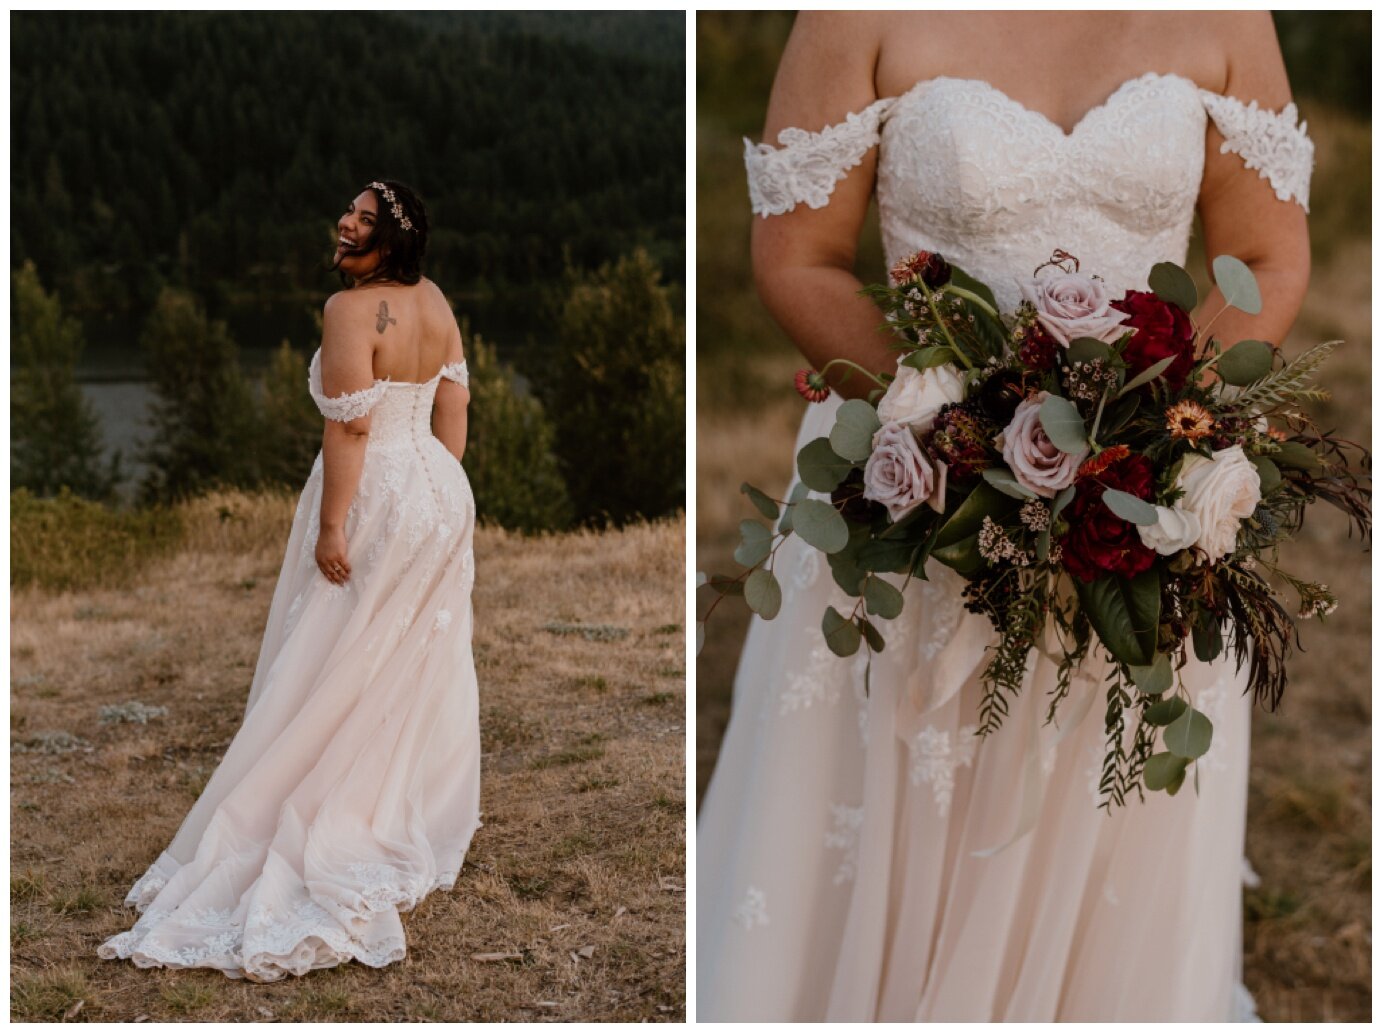 Elopement at Government Cove Peninsula - Madeline Rose Photography - PNW Elopement Photographer_0022.jpg